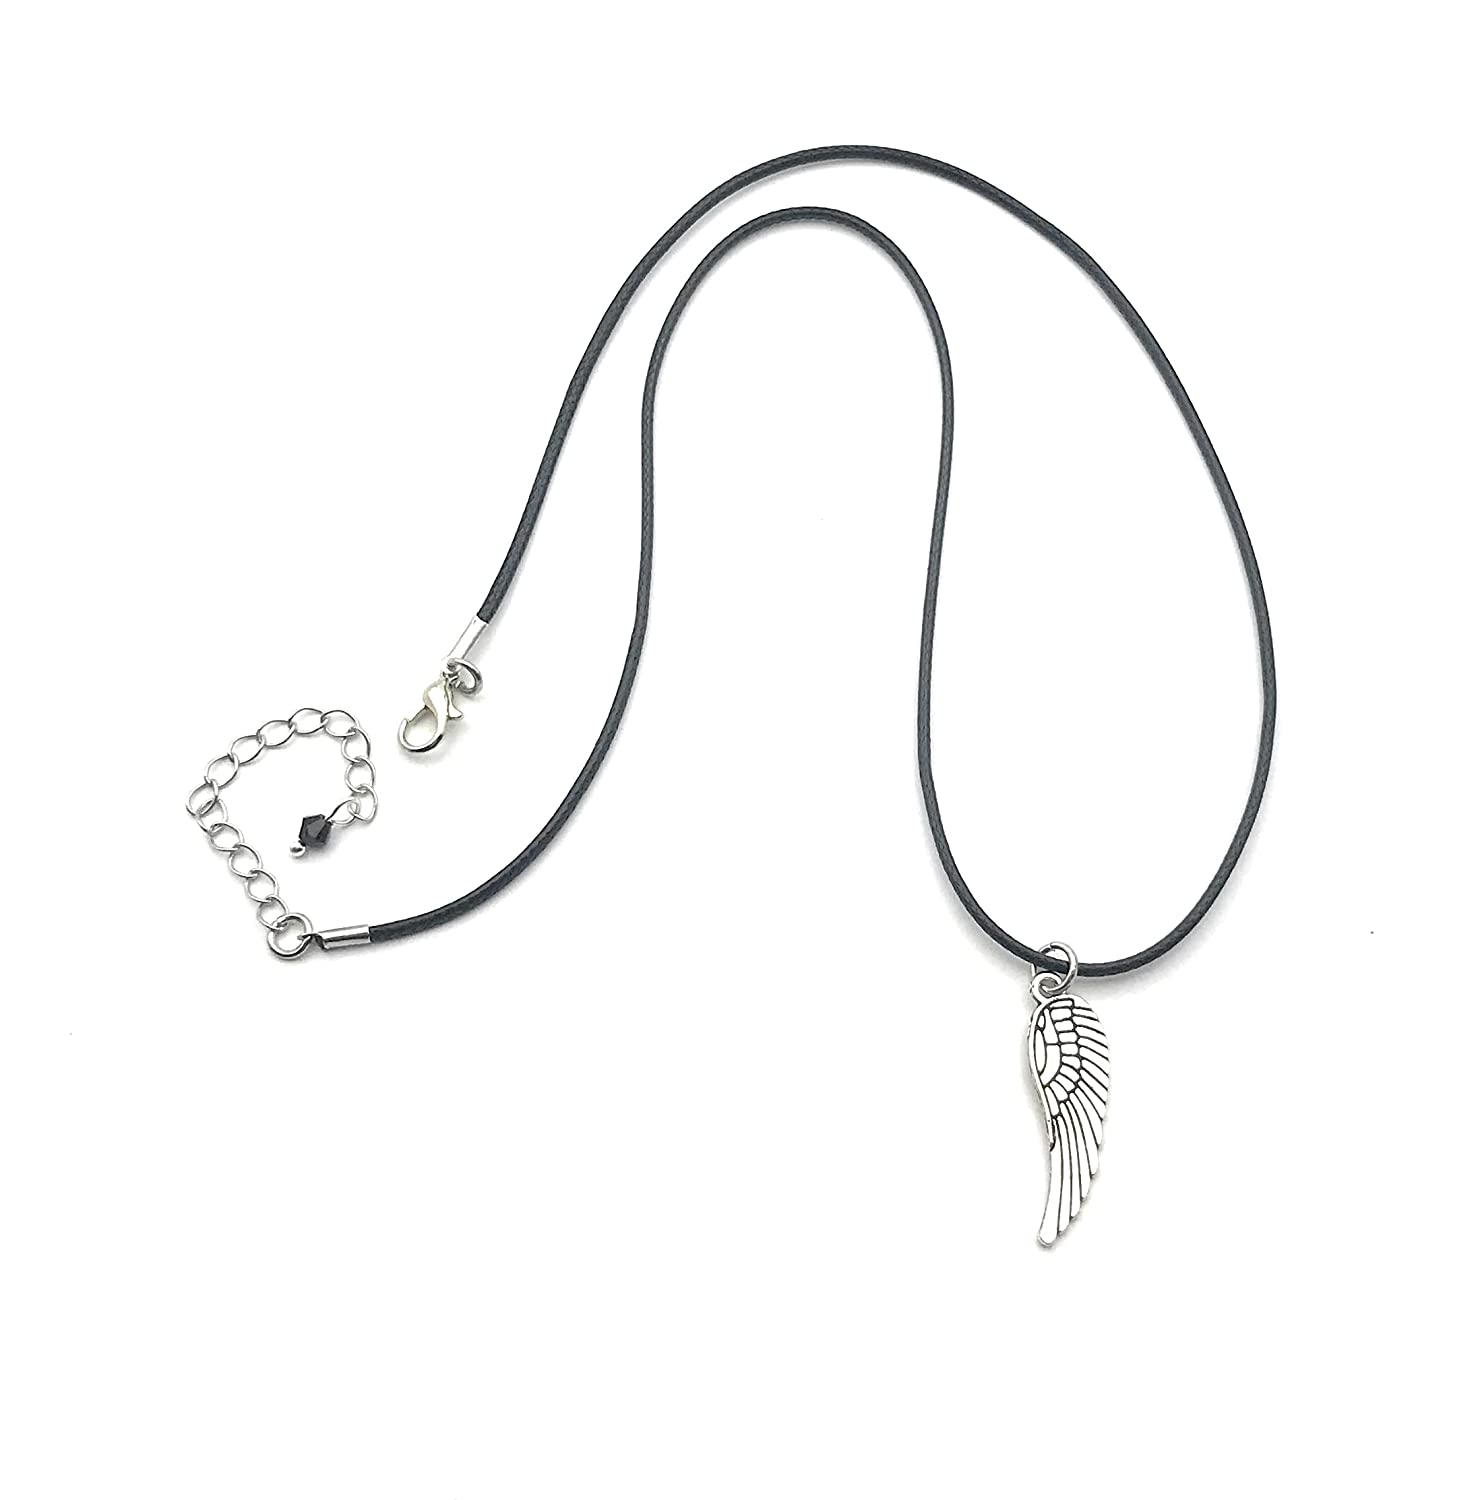 Antique Silver Angel Wing Pendant Necklace at D Jewelry Designs